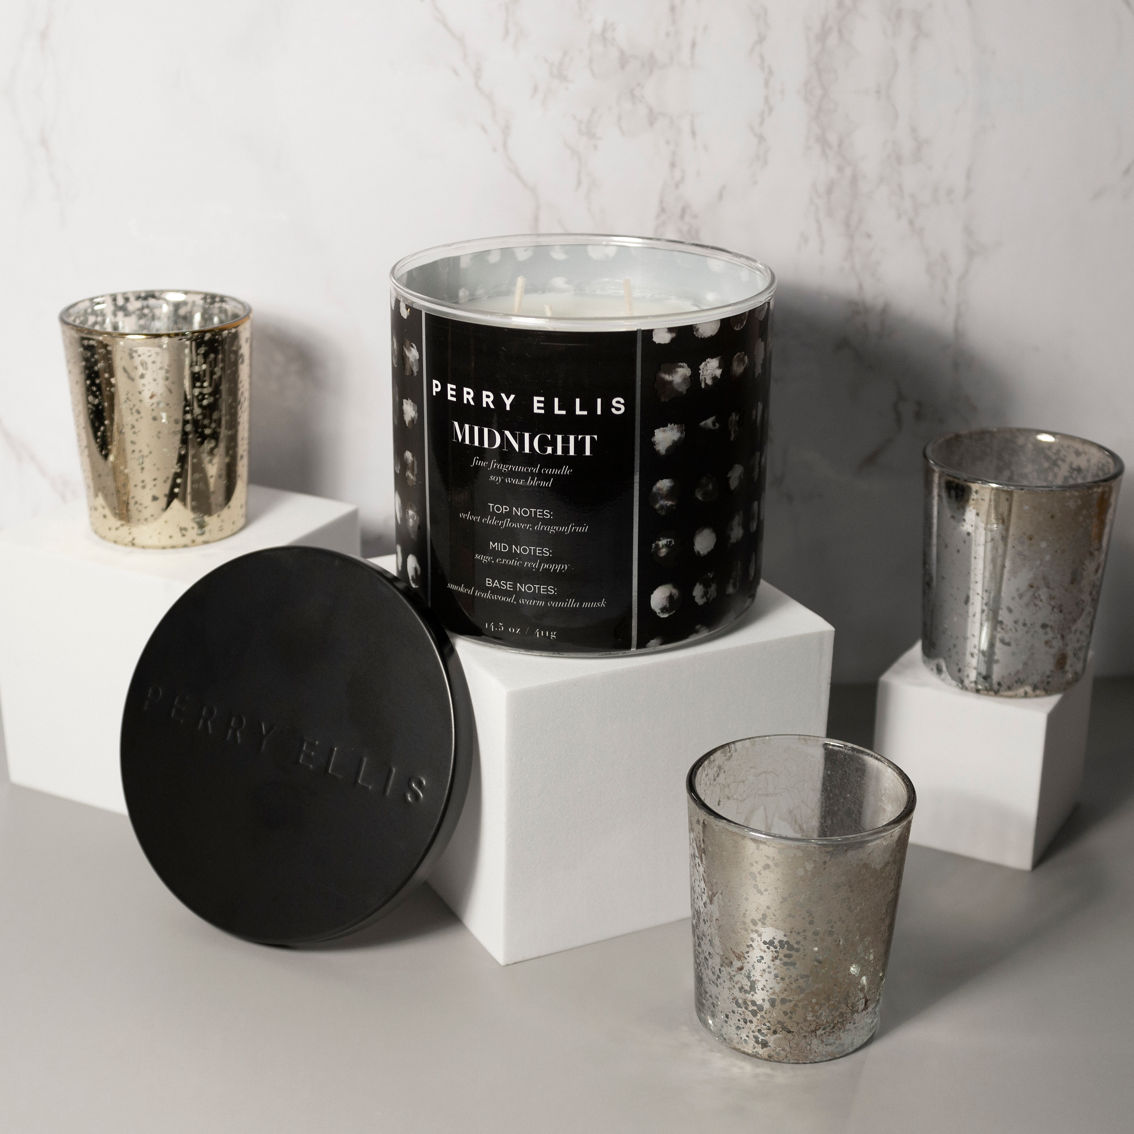 Perry Ellis Midnight Candle - Image 6 of 6